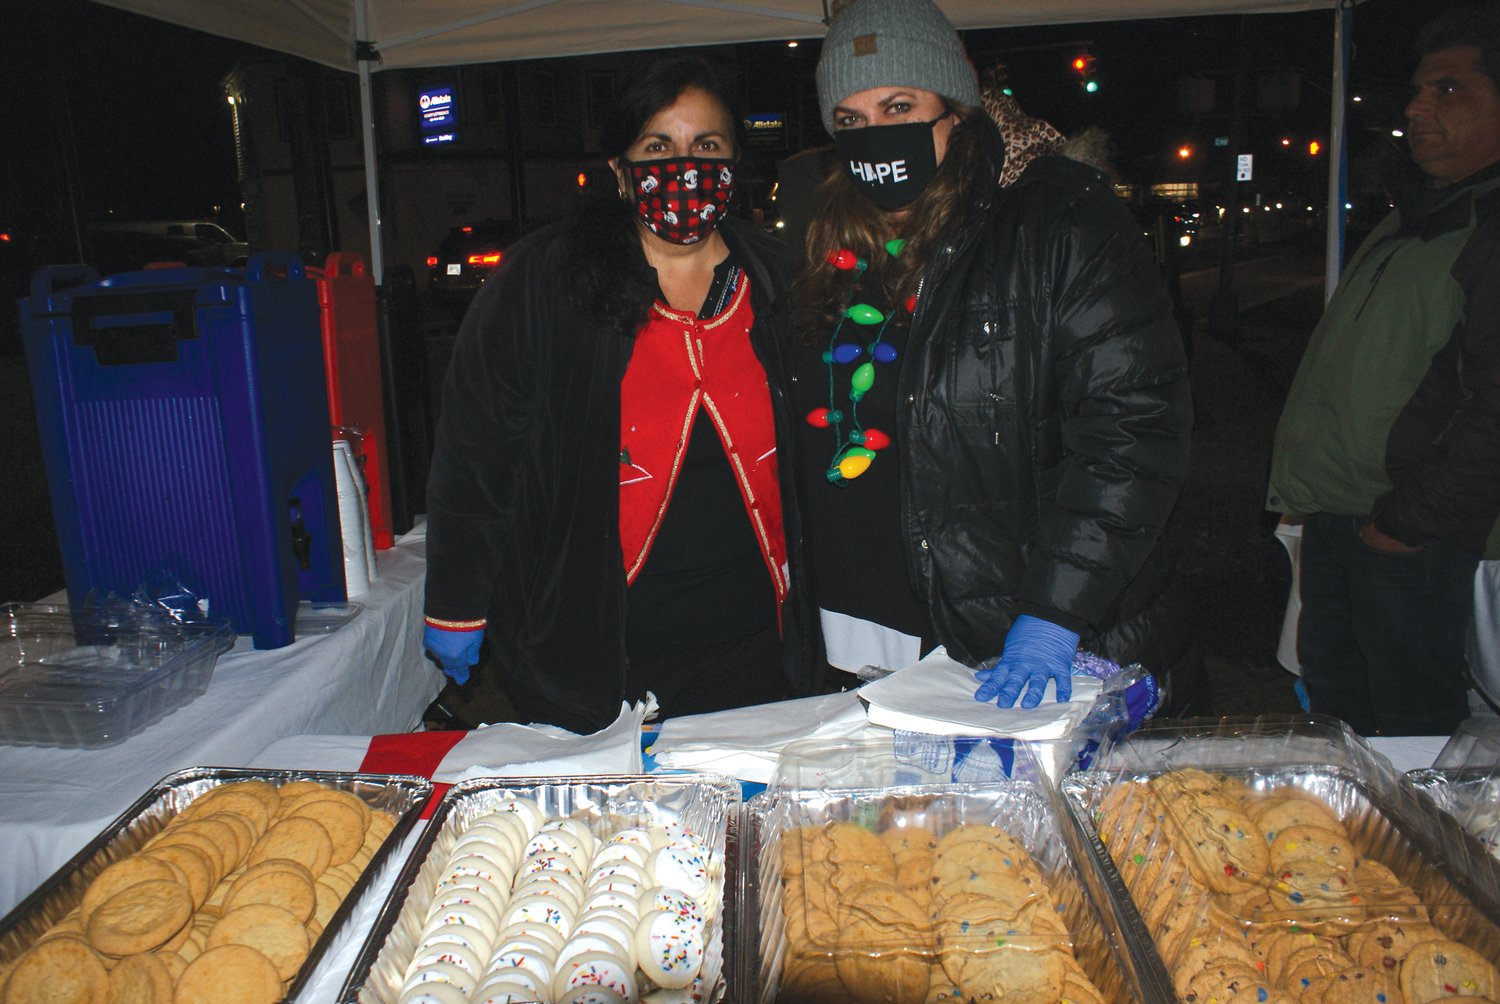 PLENTY OF GOODIES: The Saint Mary’s Feast Society
Woman’s Auxiliary were in charge of treat the night of the
Knightsville Tree and Gazebo lighting. Ready with the cookies
were Debbie Campopiano, VP of the Society and Maria
Manzi, President of the Society. Hot cocoa was also solved
as well as pizza.